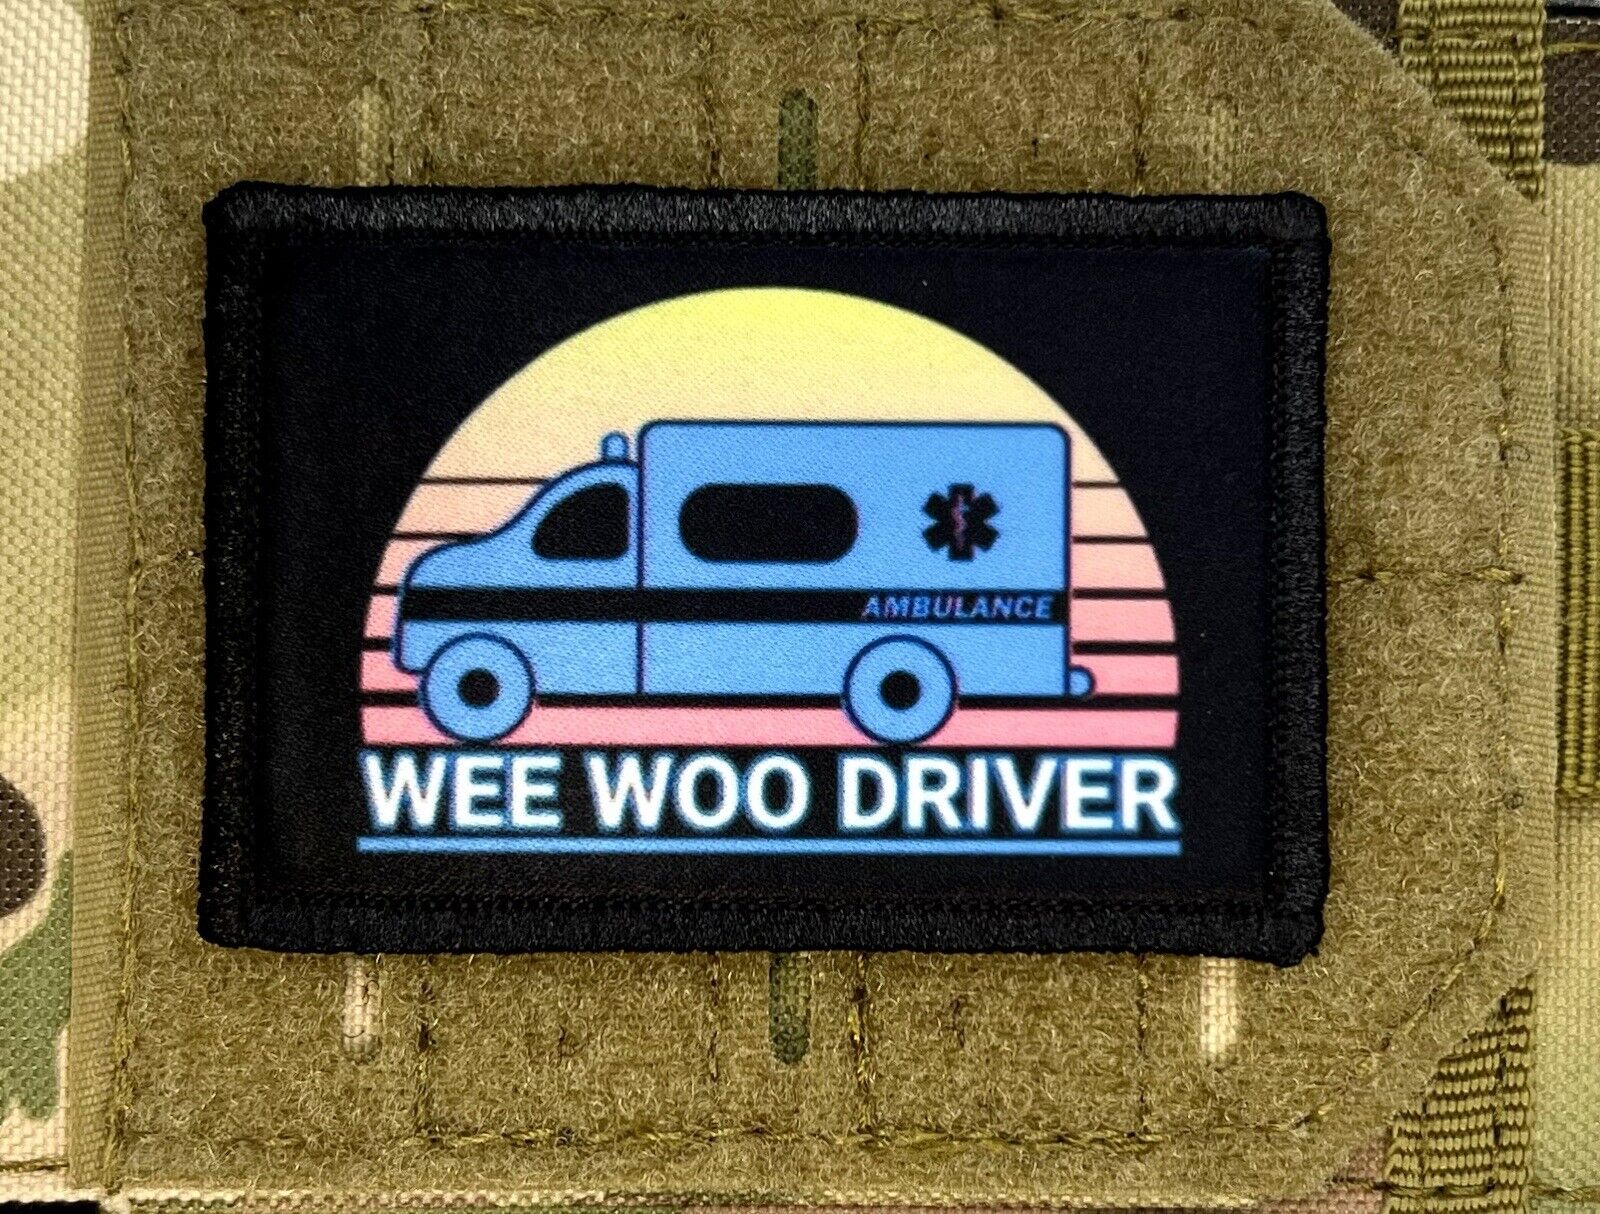 Wee Woo Driver (Ambulance) Morale Patch / Military Badge Tactical Airsoft 543